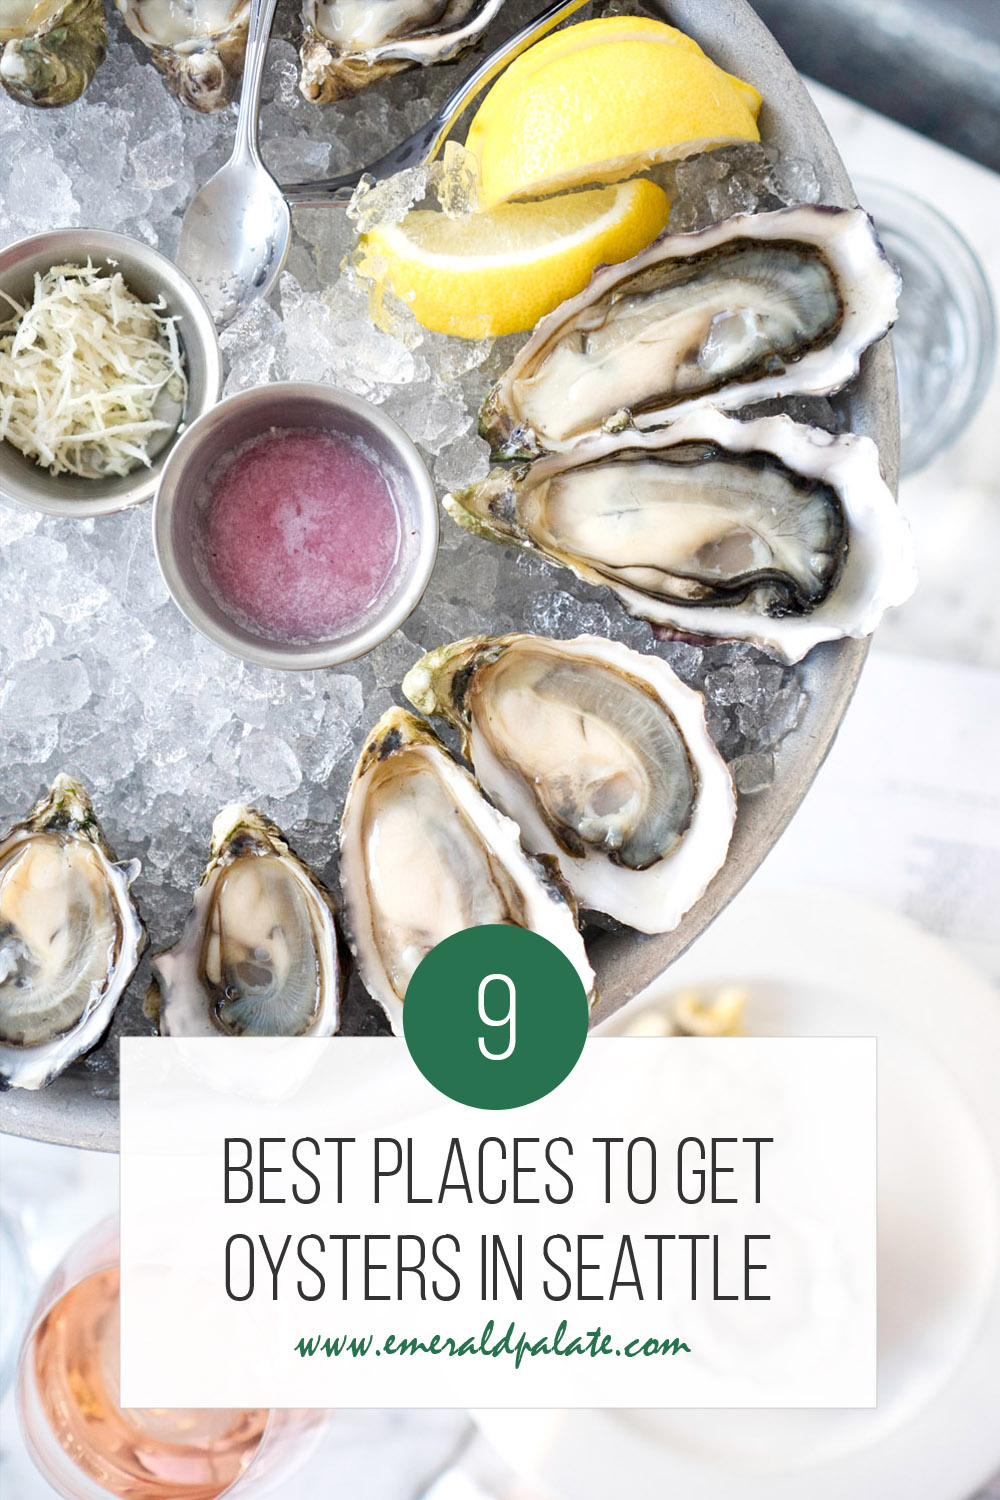 The best oyster restaurants in Seattle, as told by a local. If you love raw oysters on the half shell or fried oysters, here are the best Seattle oyster bars you need to visit. You will even find which have the best oyster happy hours in Seattle.